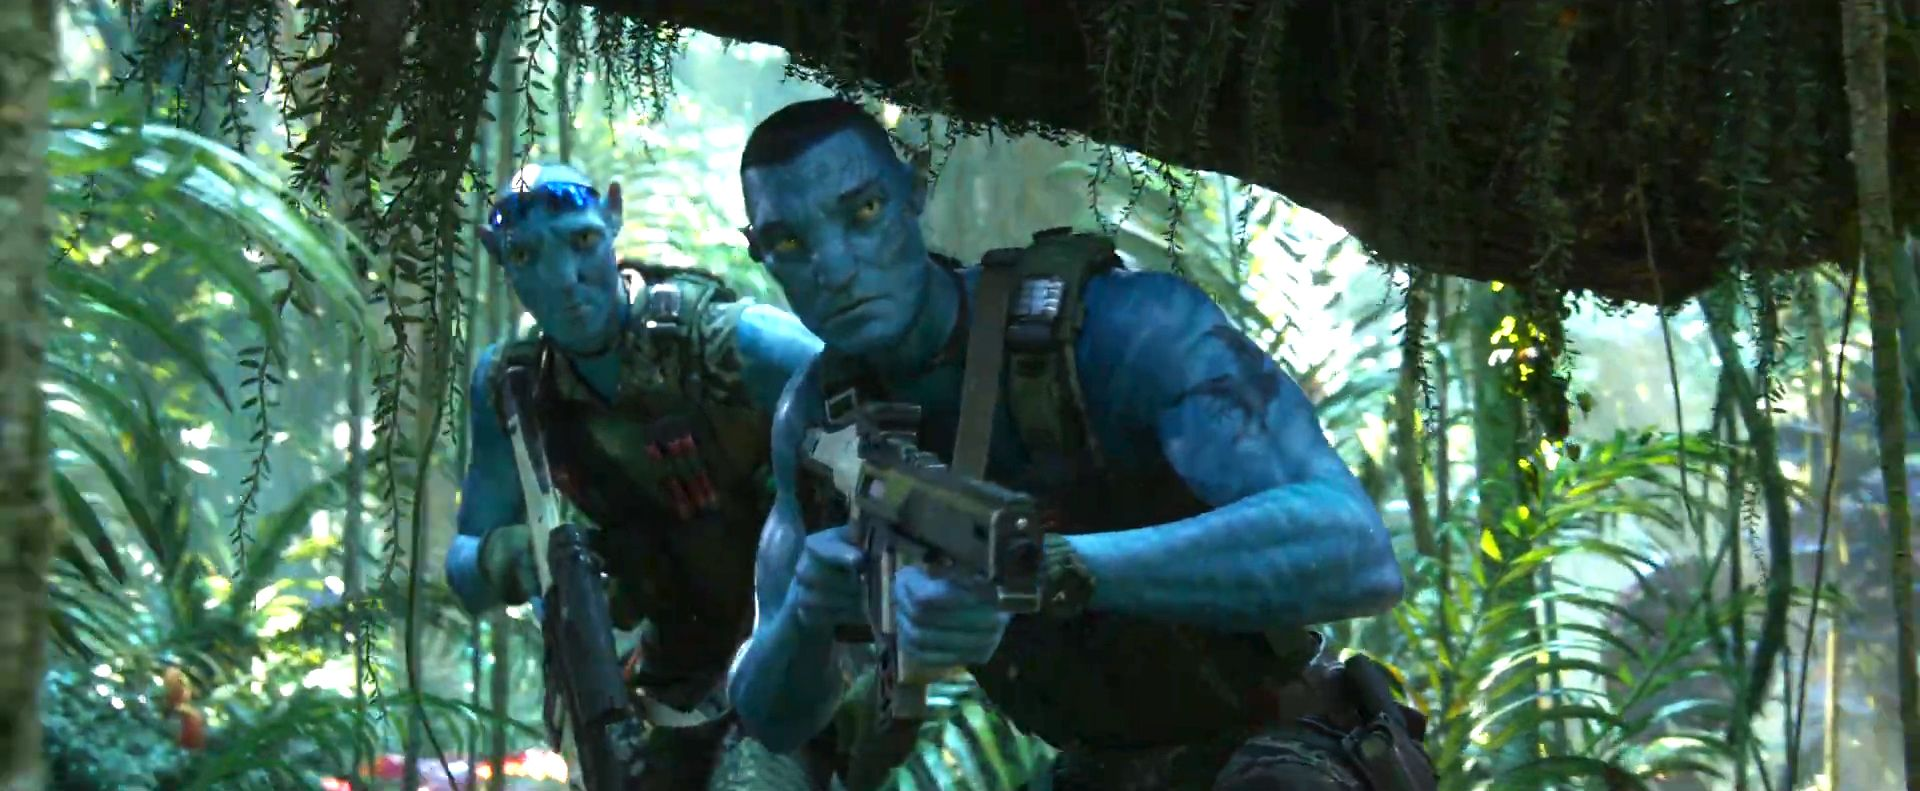 ‘Avatar 2’ star hints his horror franchise could be getting its own long-awaited sequel